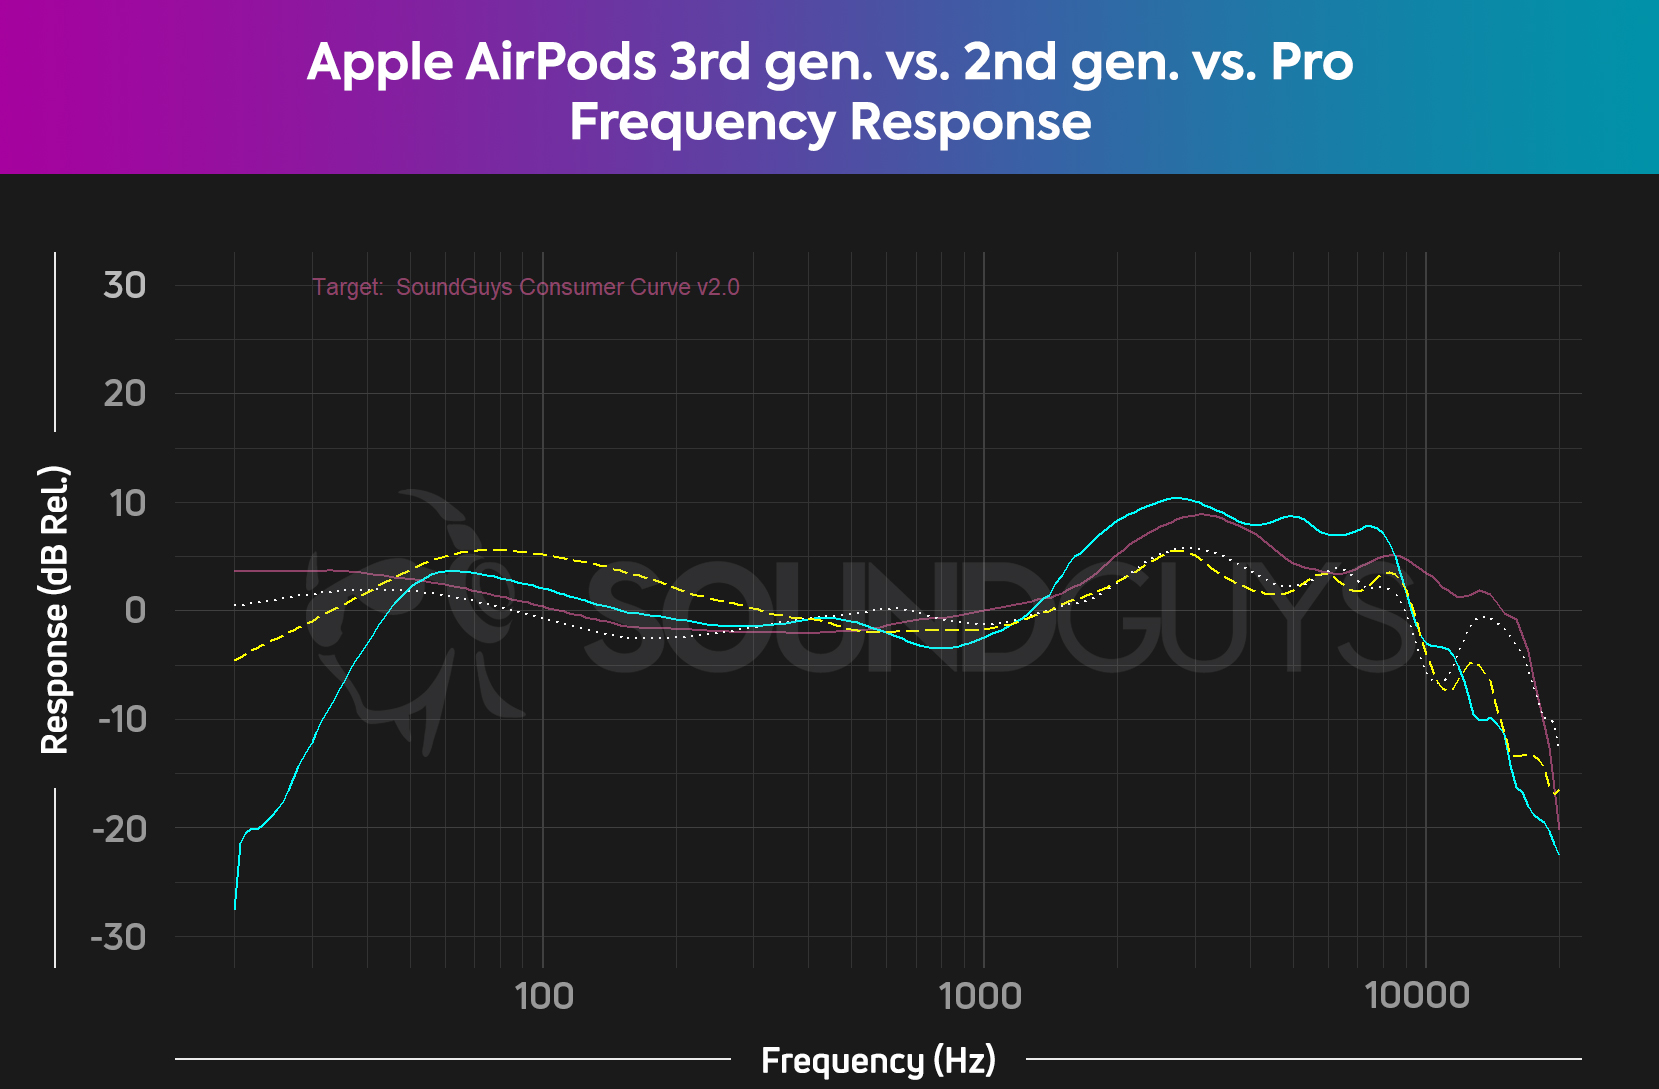 A plot comparing the frequency responses of the Apple AirPods (3rd generation), the Apple AirPods (2nd generation) and the Apple AirPods Pro.